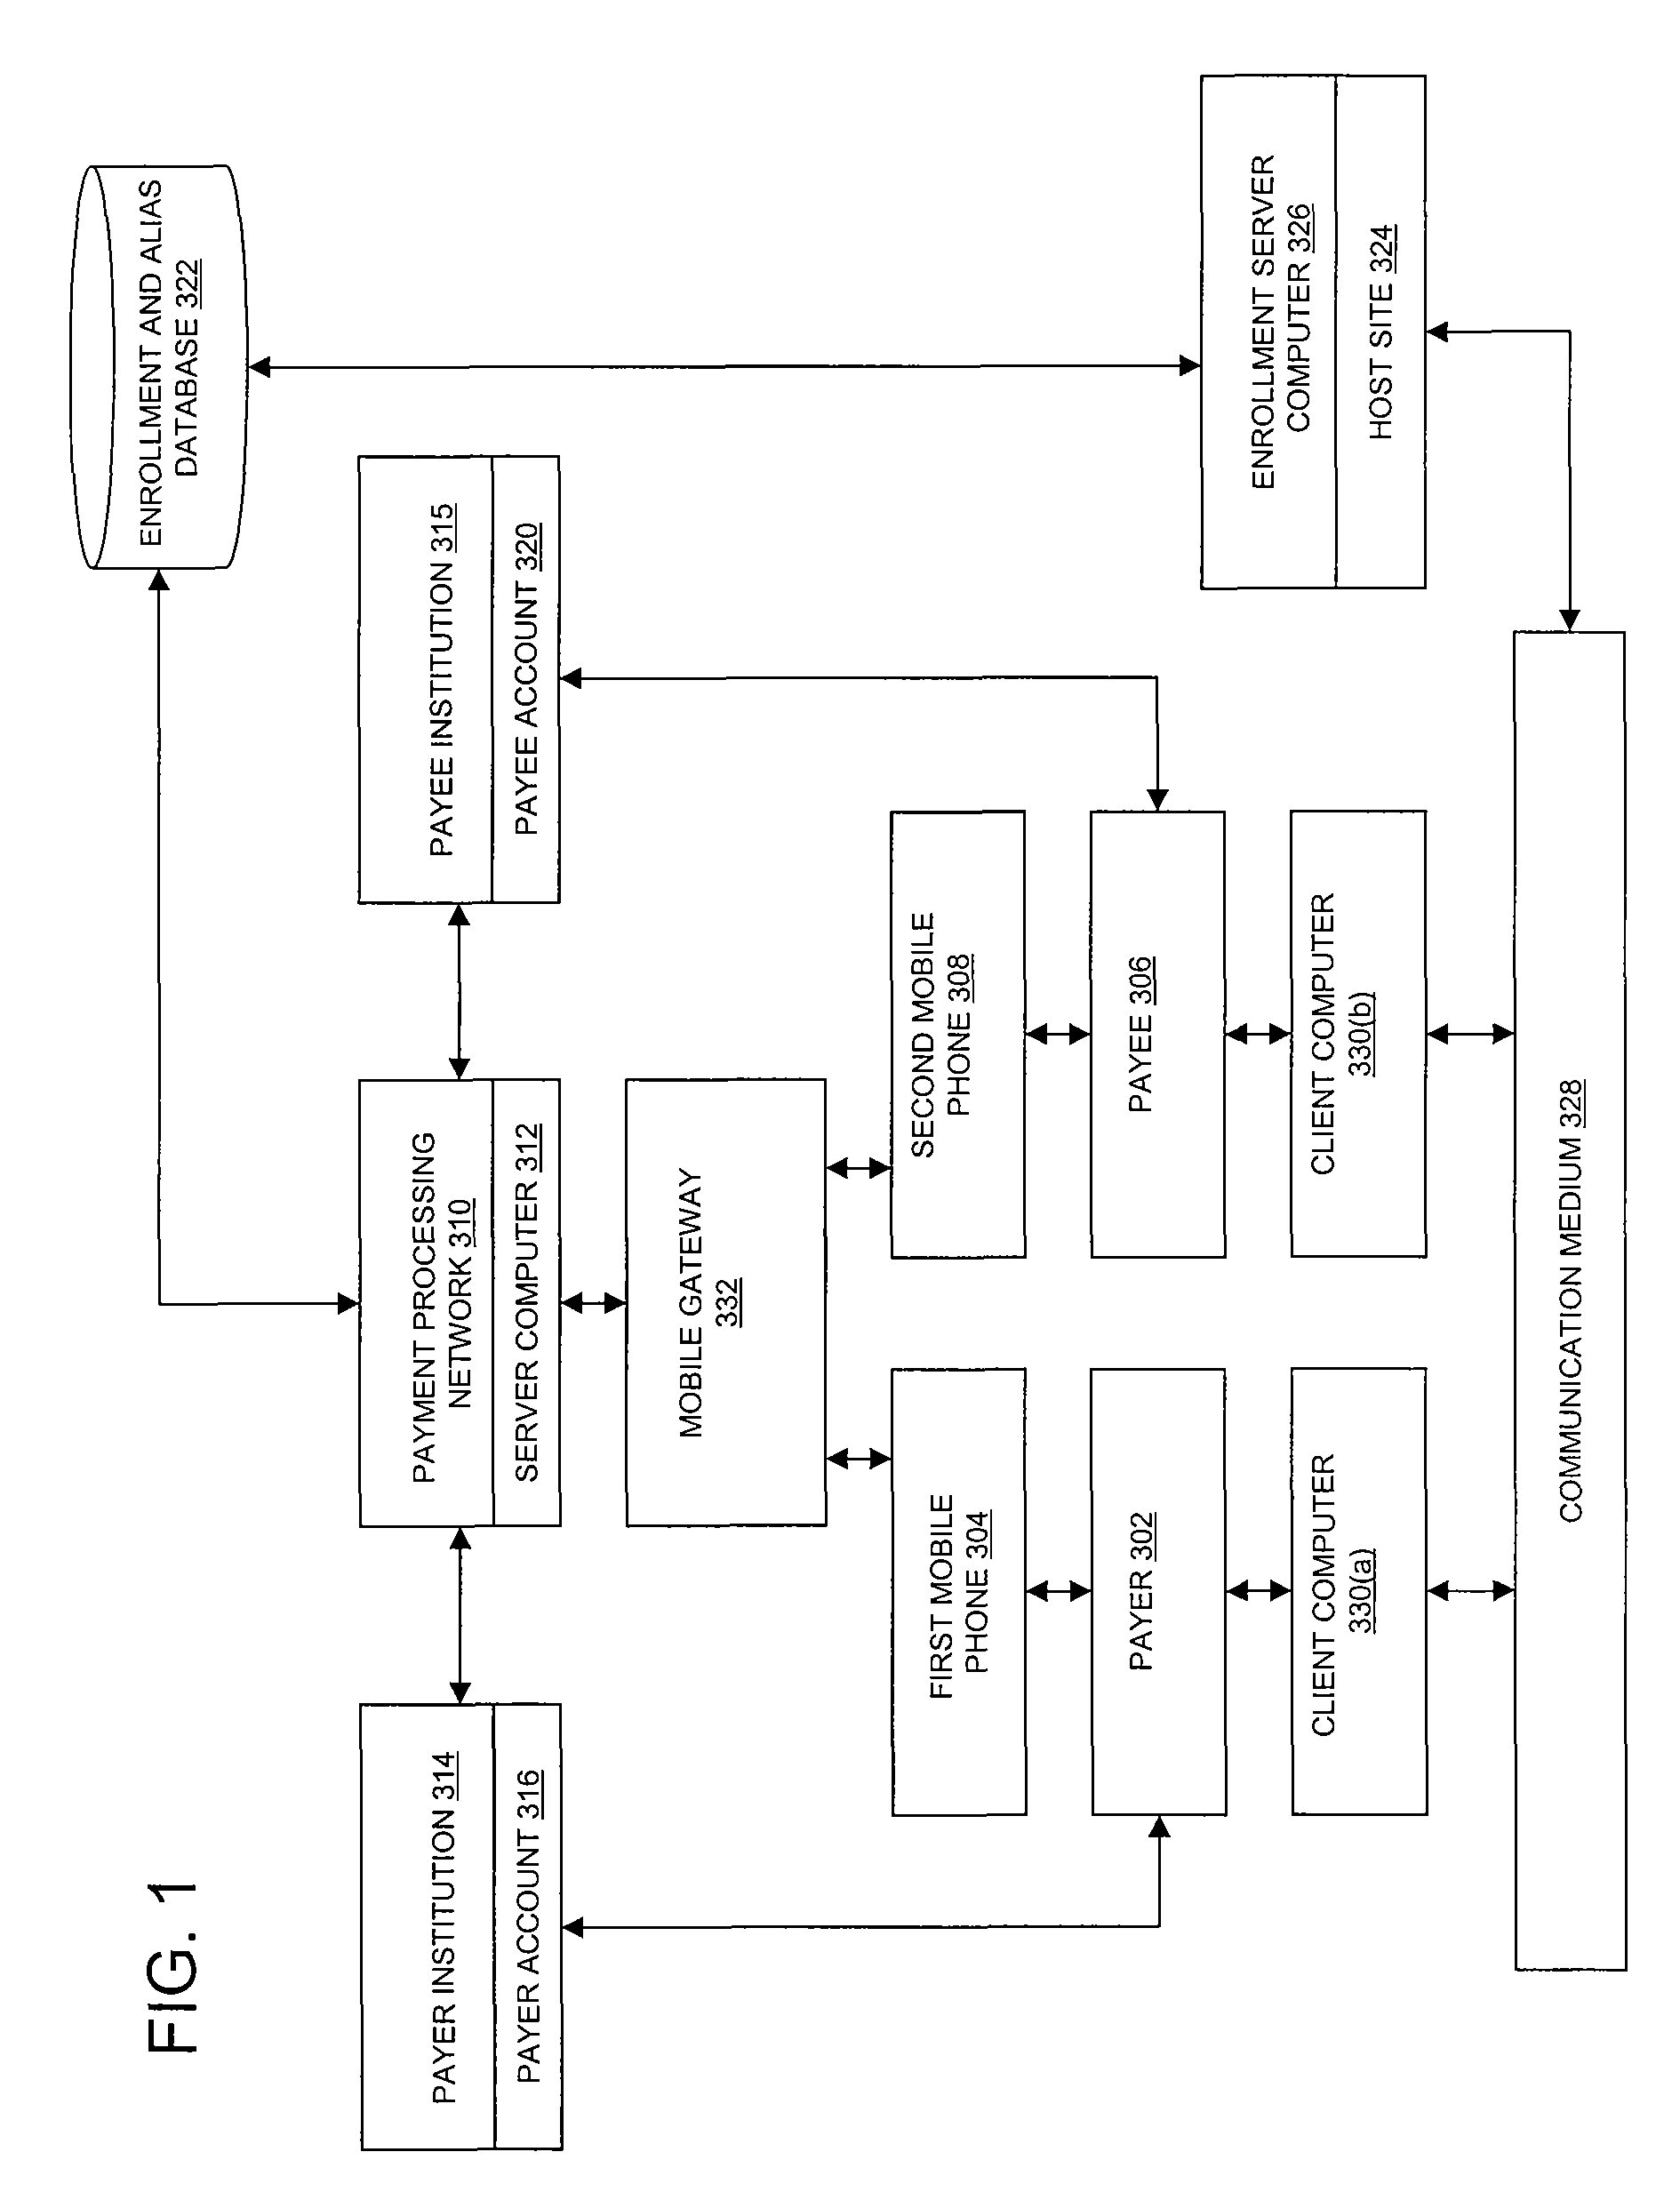 Mobile payment system and method using alias